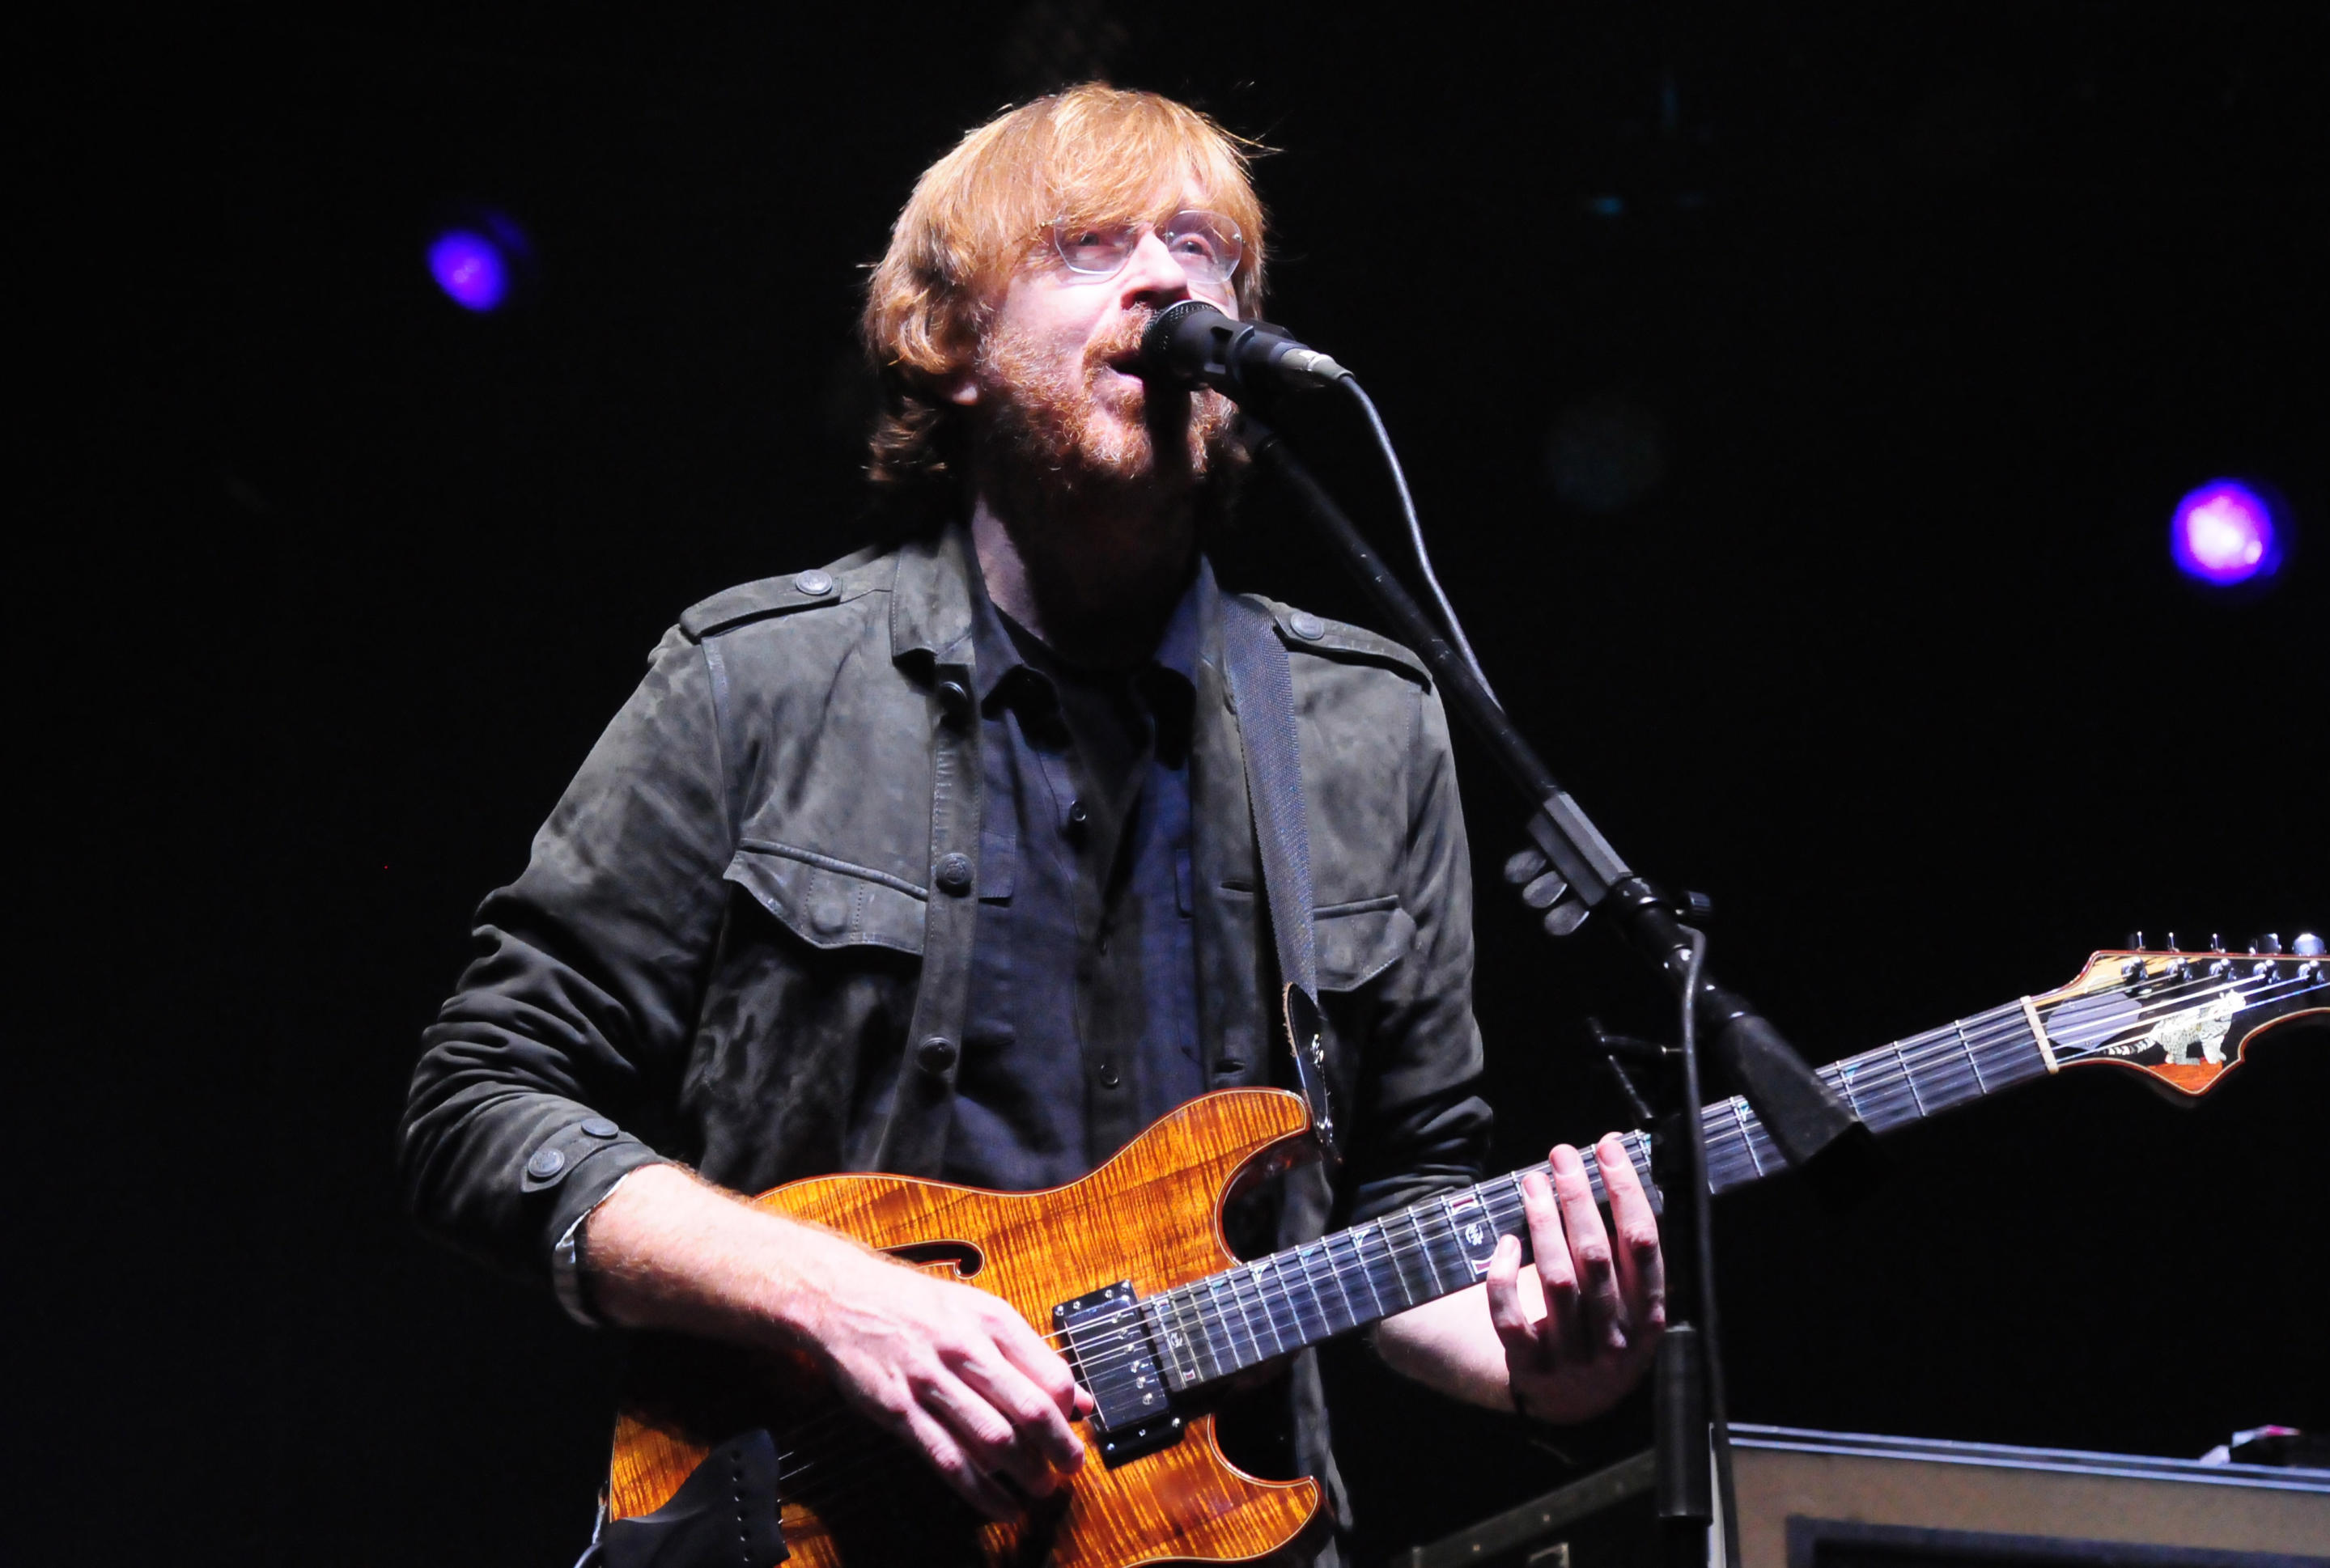 Phish frontman Trey Anastasio performs during their benefit concert for Vermont flood relief in 2011.